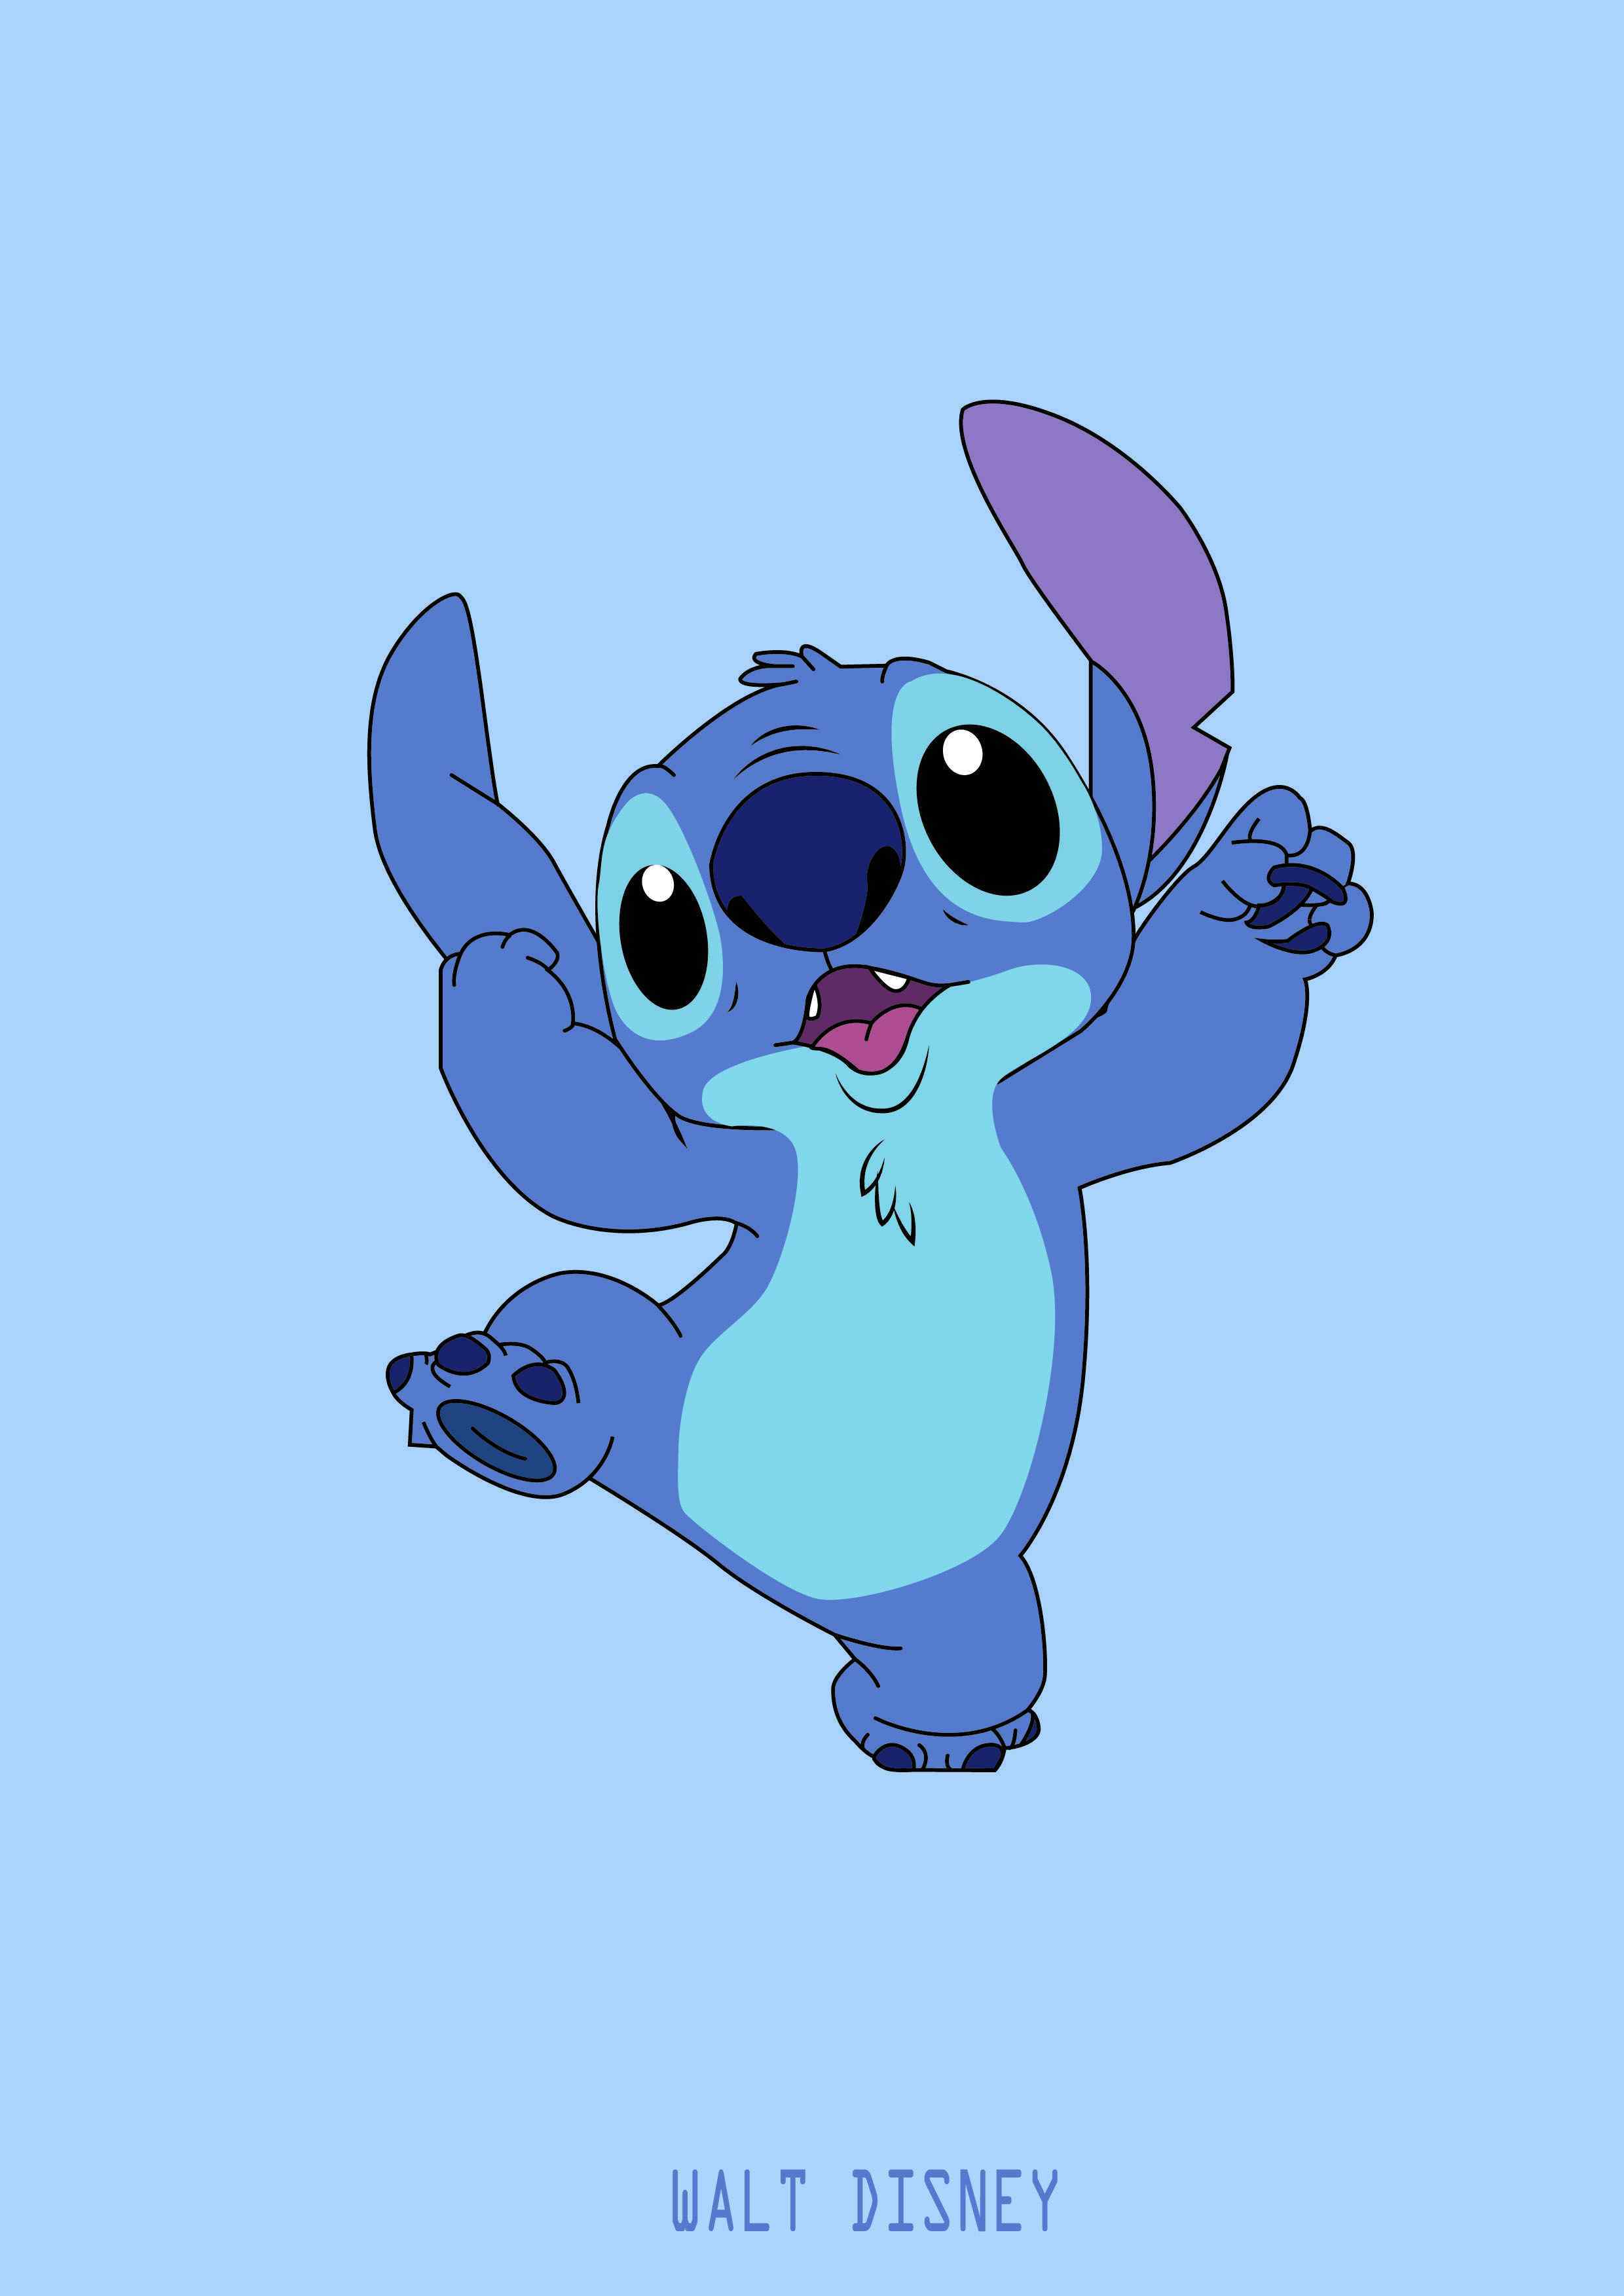 Stitch Aesthetic Wallpapers Wallpaper Cave Aesthetic pastel wallpaper aesthetic backgrounds aesthetic wallpapers. stitch aesthetic wallpapers wallpaper